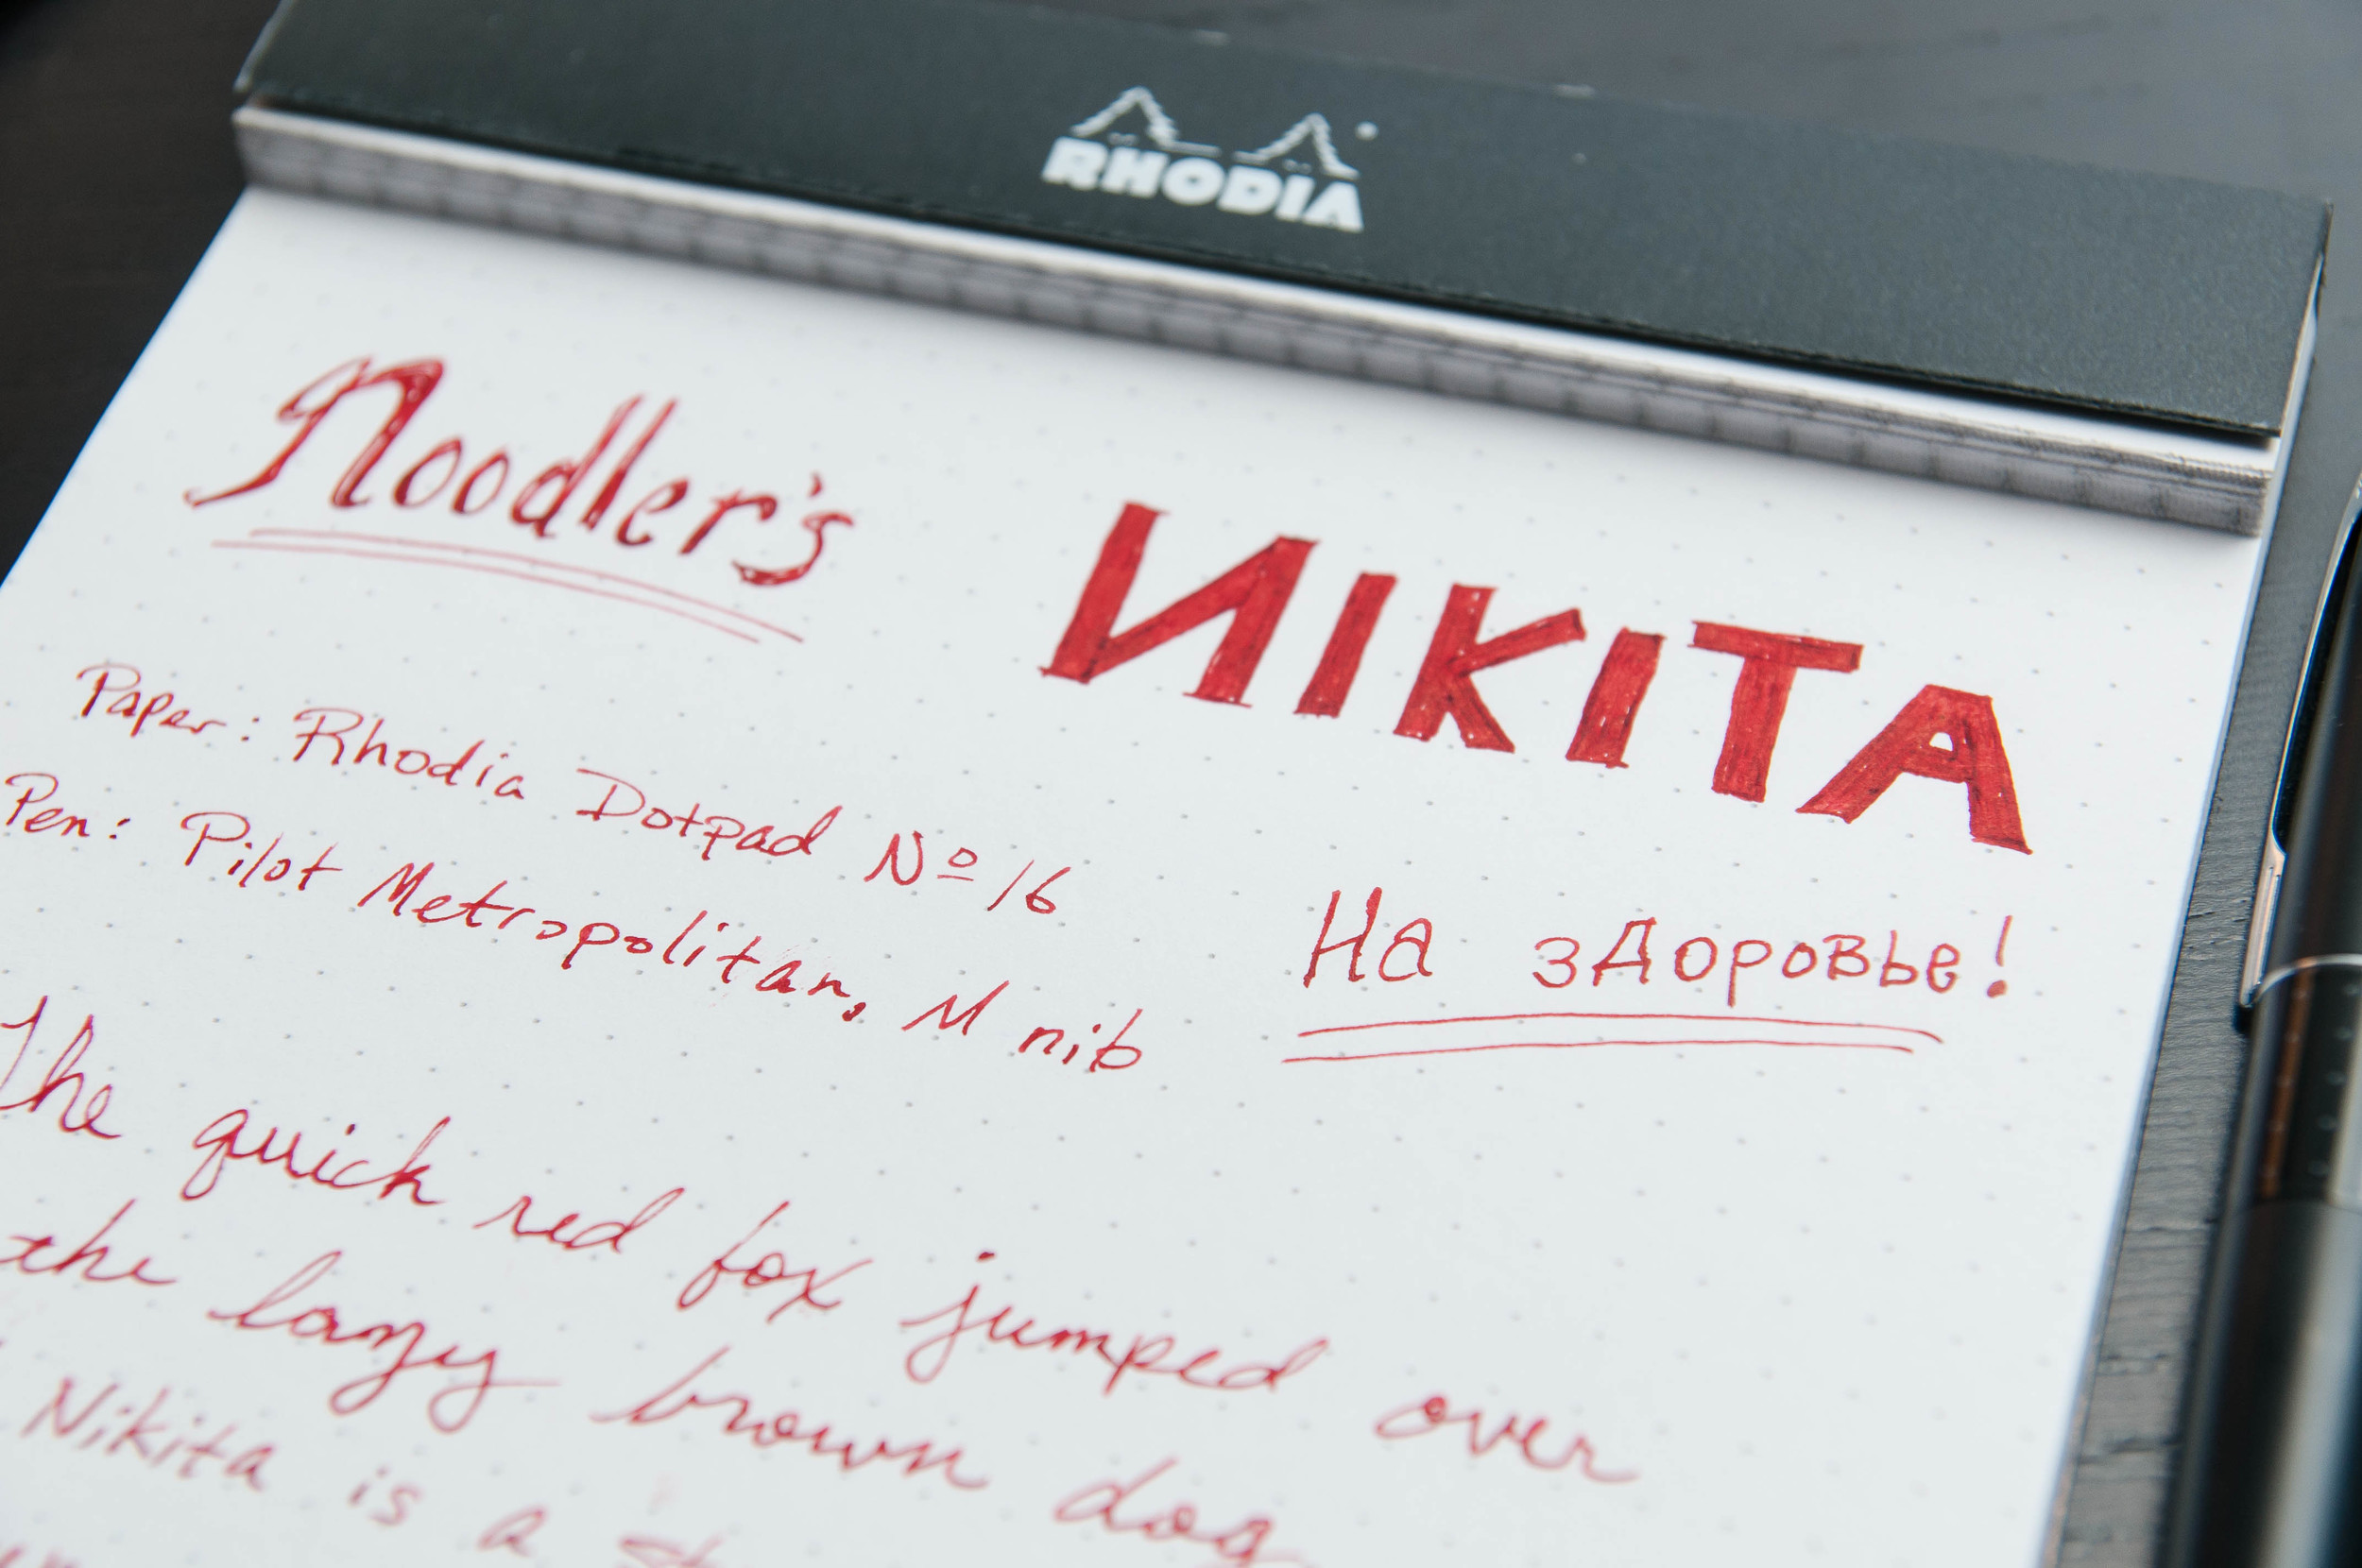 Noodler's Nikita Ink Review — The Pen Addict